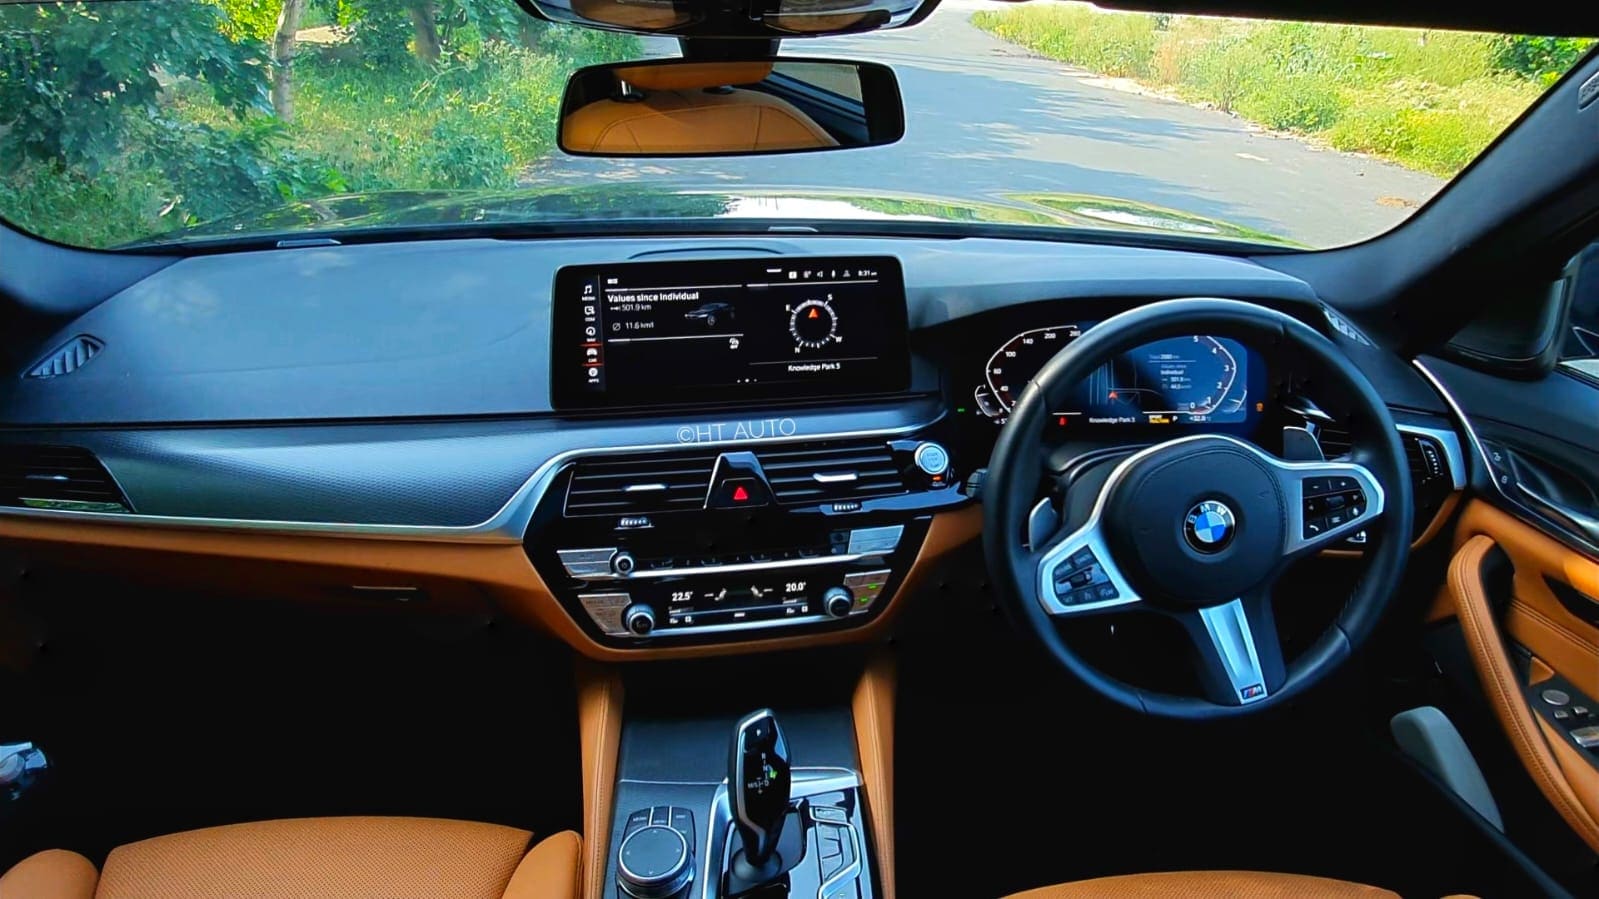 Oriented towards the driver, the cabin of the BMW 5 Series has a neat touch and feel.